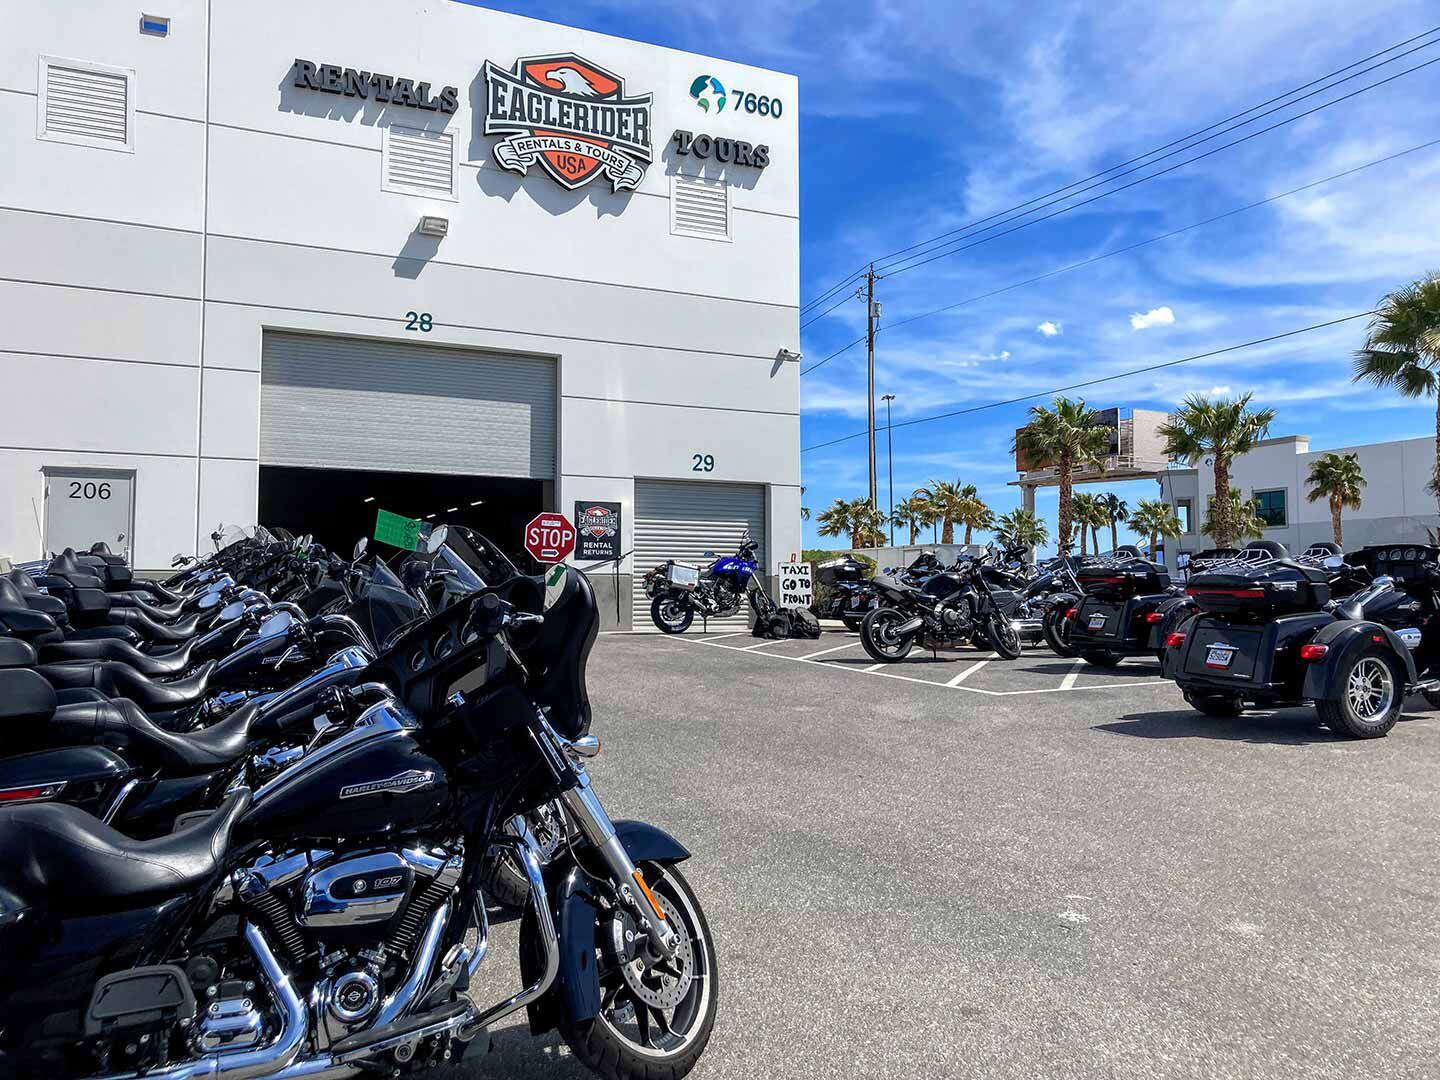 Where dreams go to die. And then get reborn for the next customer. EagleRider Las Vegas location on Dean Martin Drive.